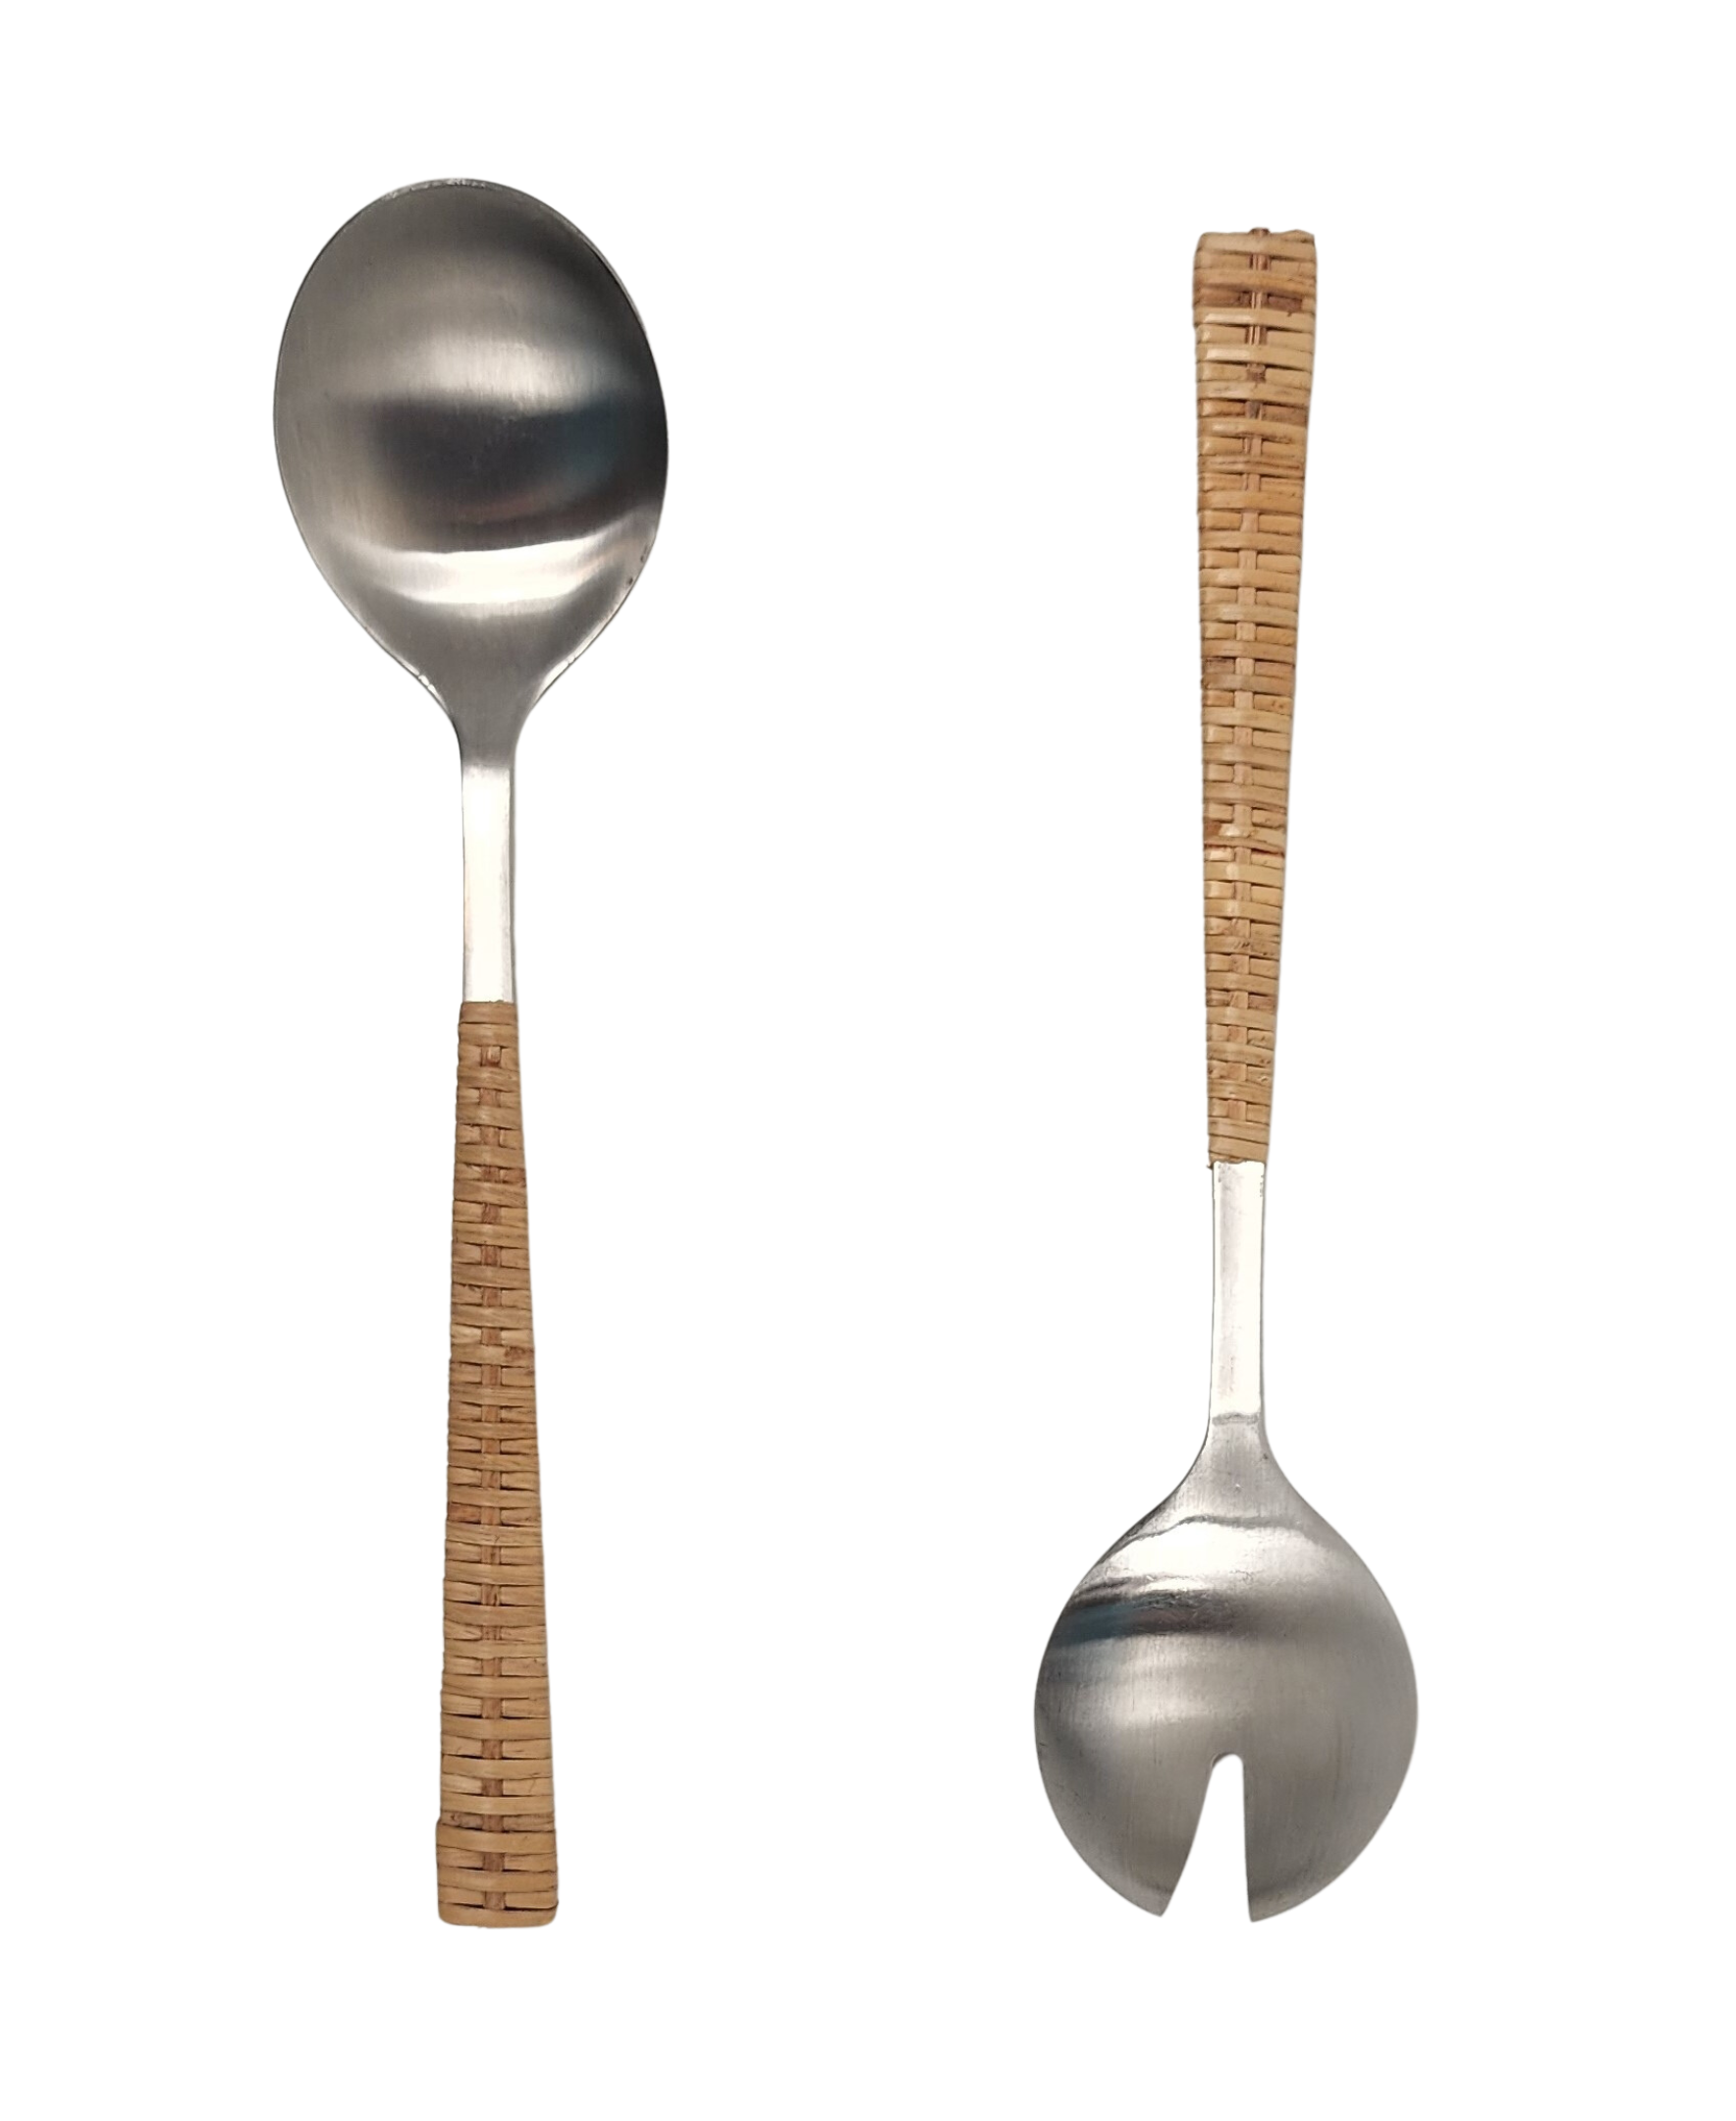 Rattan Stainless-Steel Serving Pieces (Set of 2) - With Gift Box